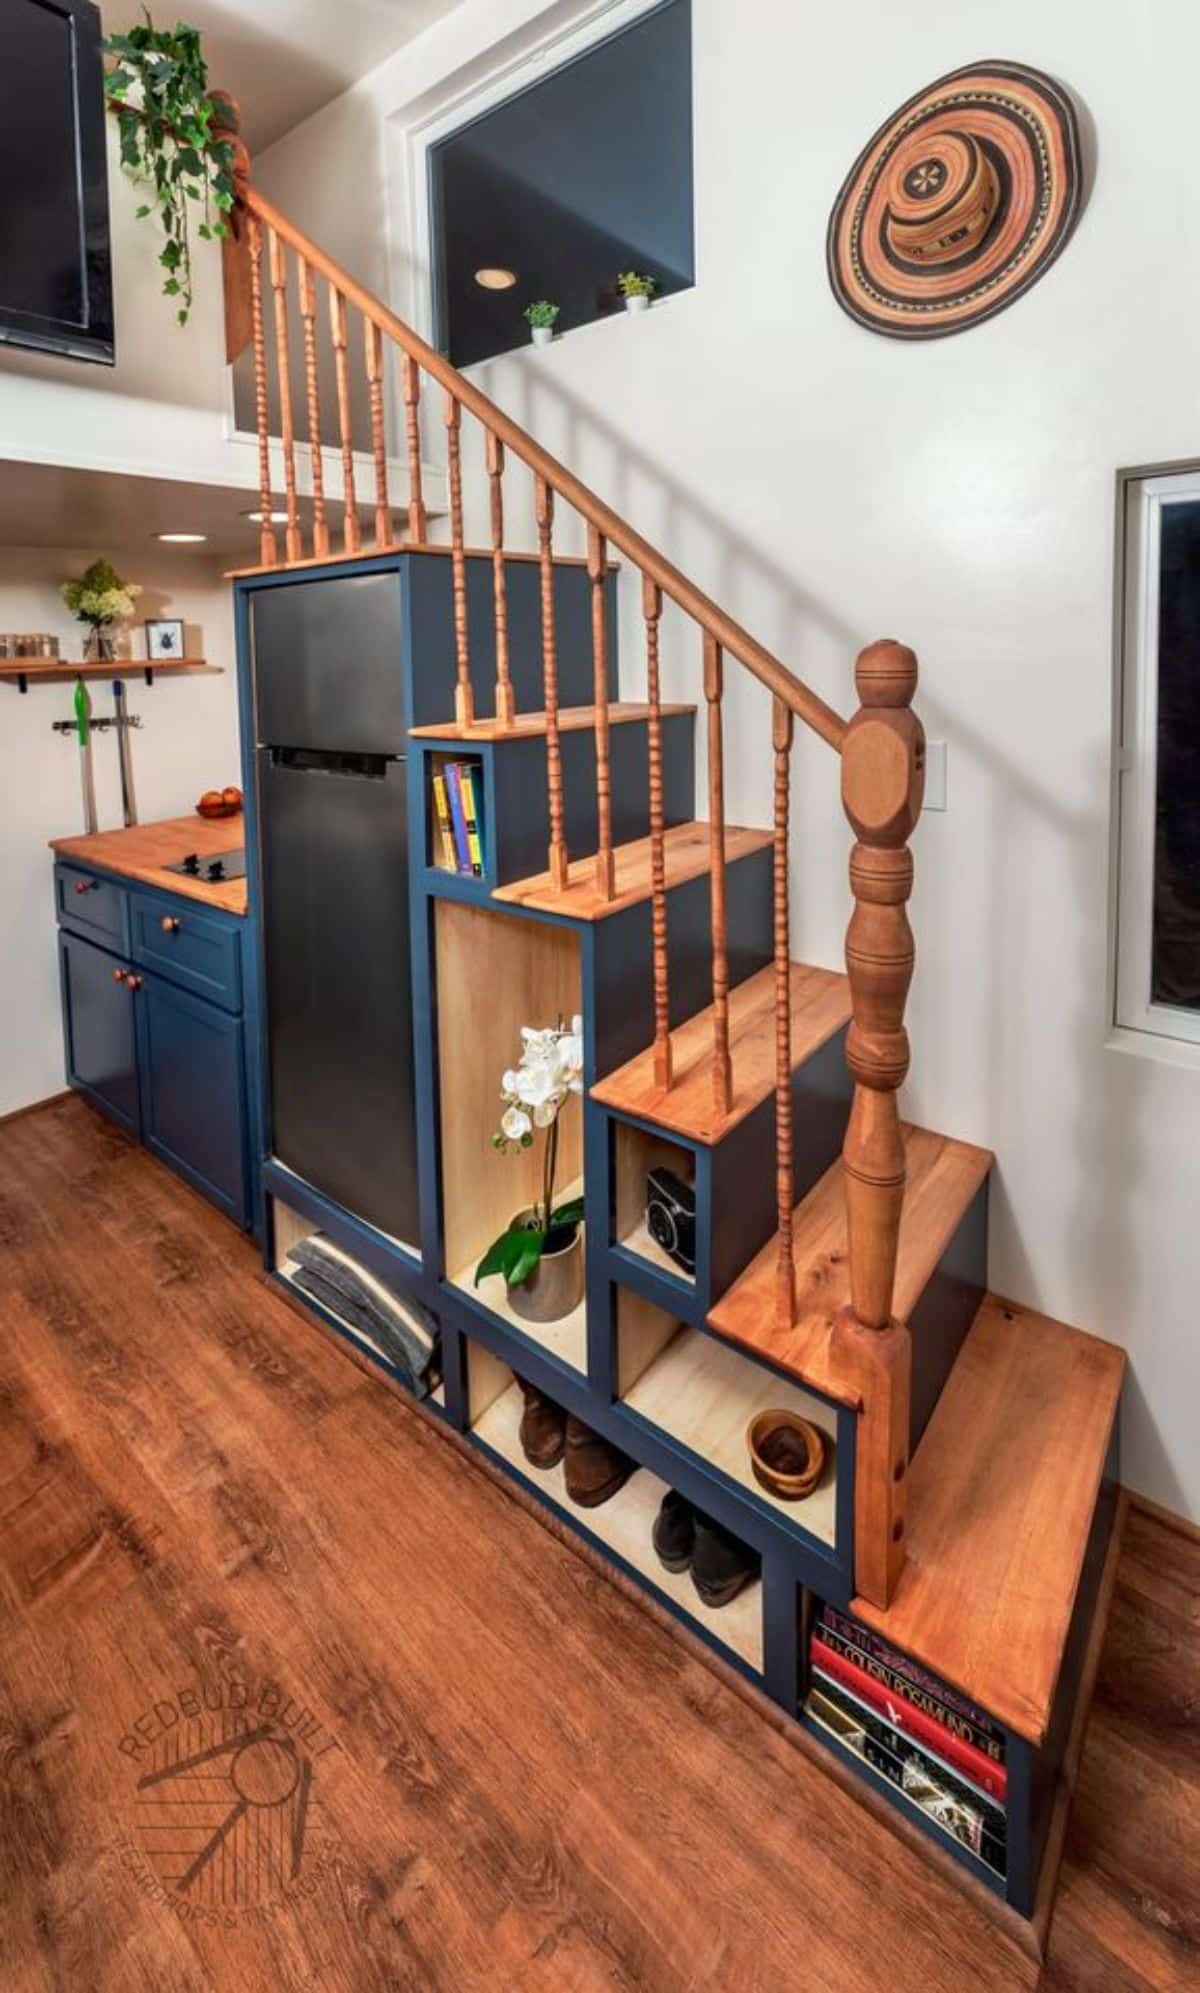 Multi purpose stairs with refrigerator underneath and other storage cabinets